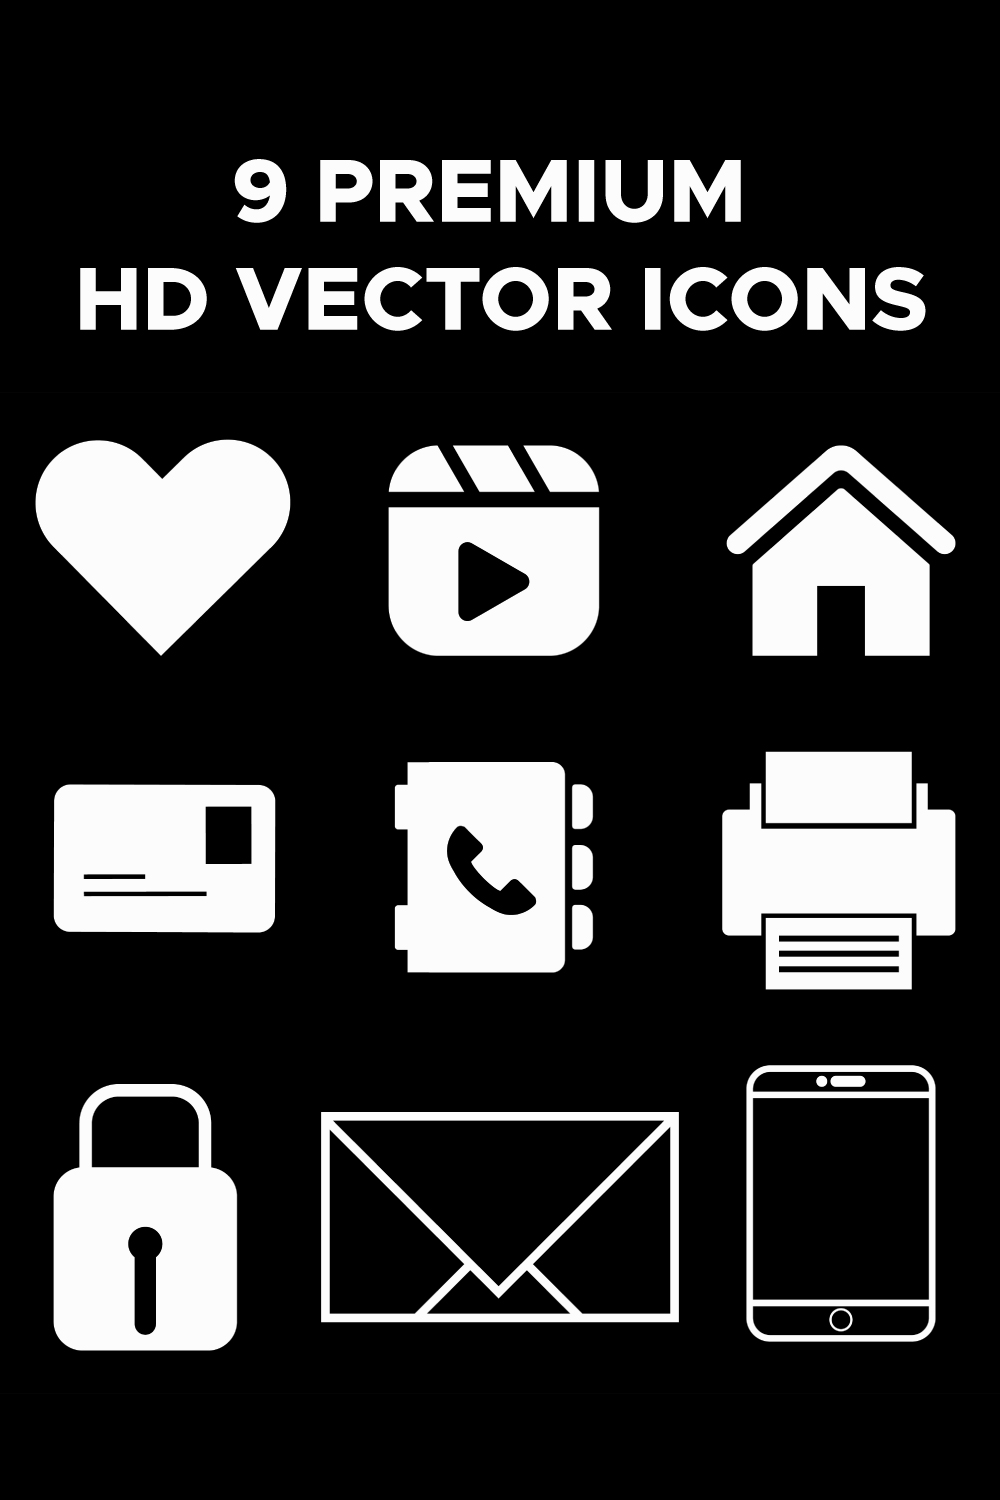 9 Premium HD Vector Icons - pinterest image preview.